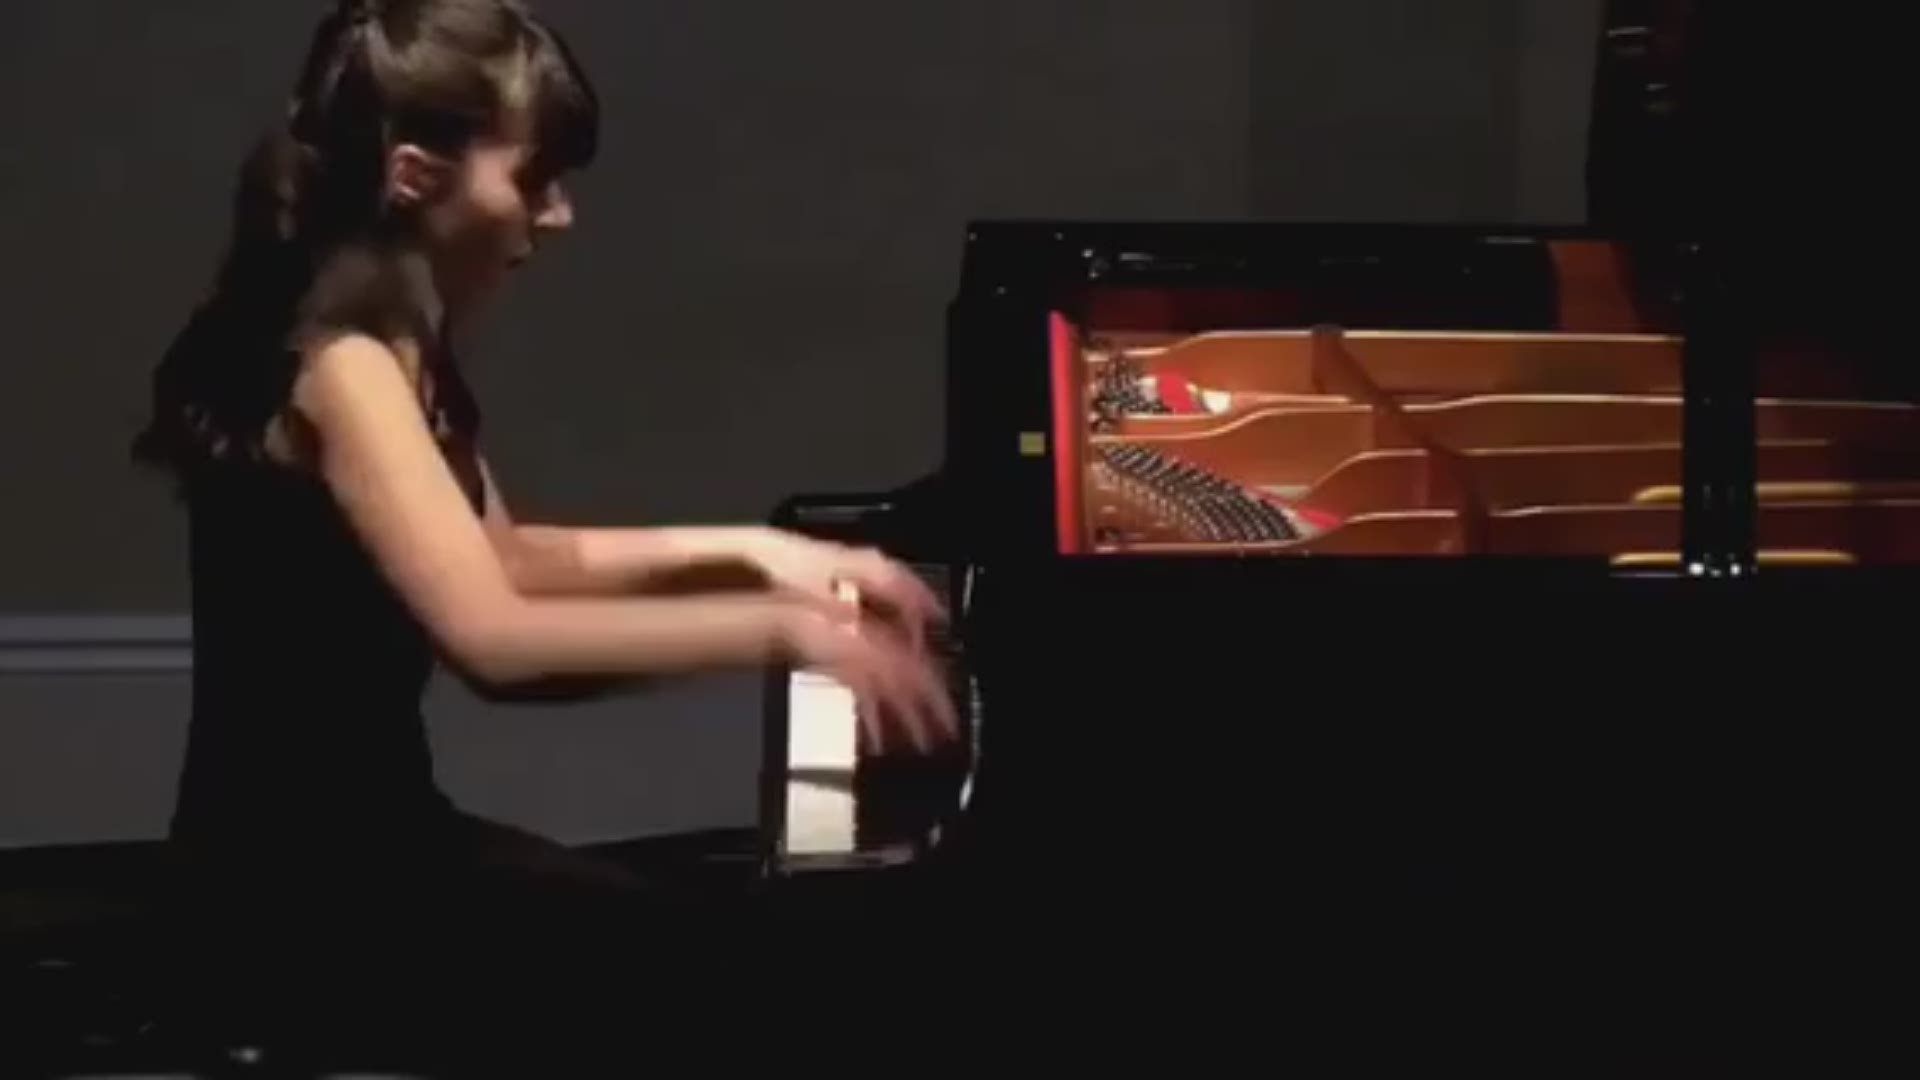 The pianist hails from Bethesda, Maryland and now she is about to make her debut at famous Carnegie Hall.